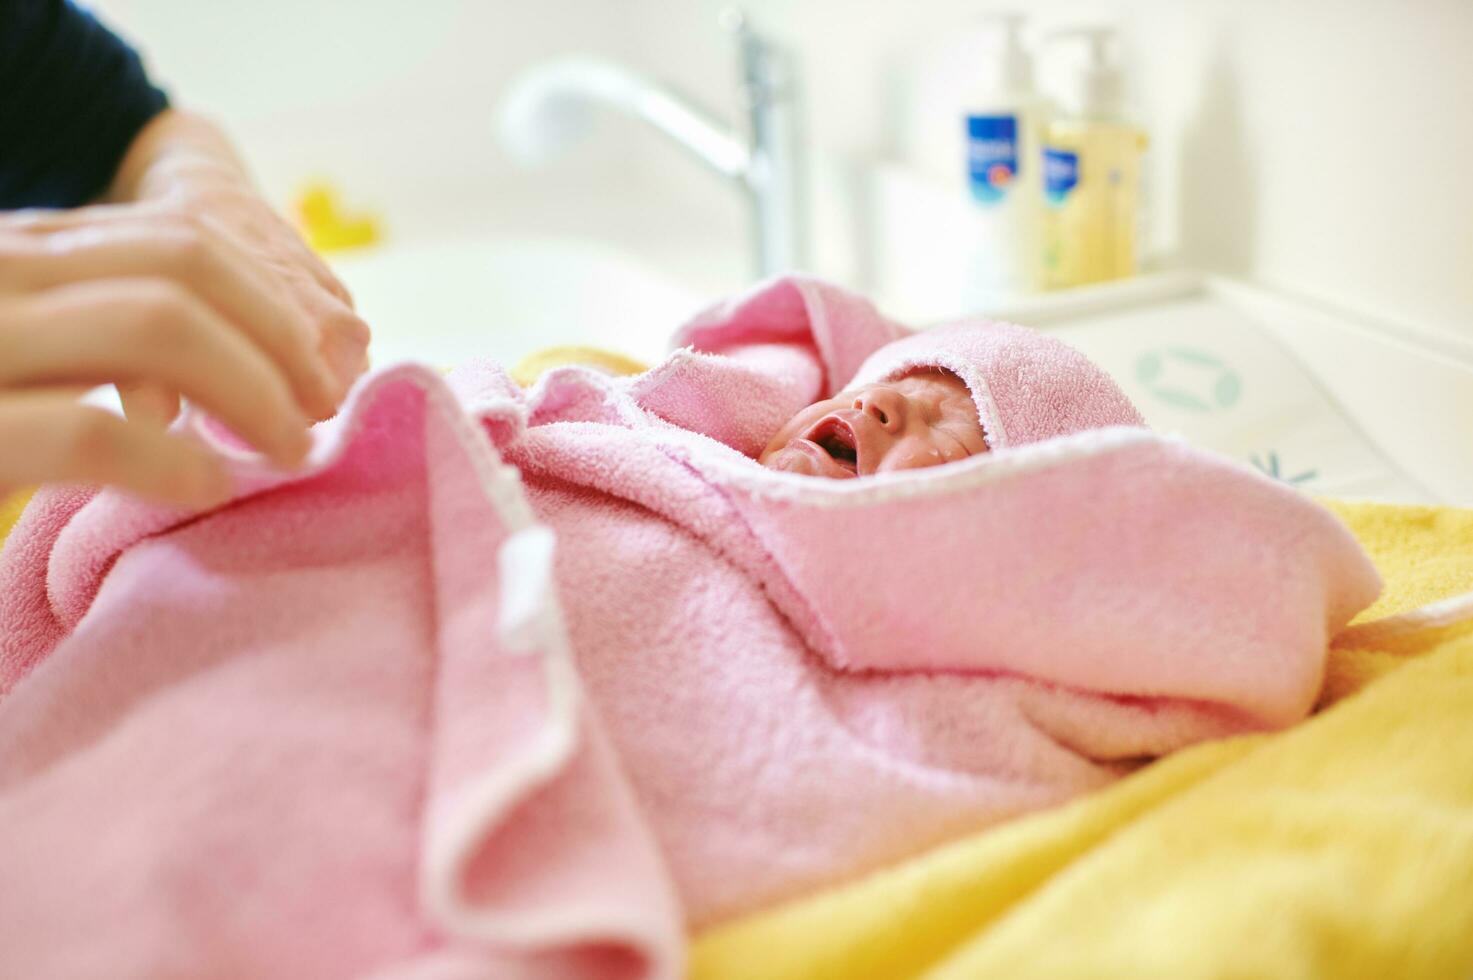 Newborn baby covered in towel after taking bath photo